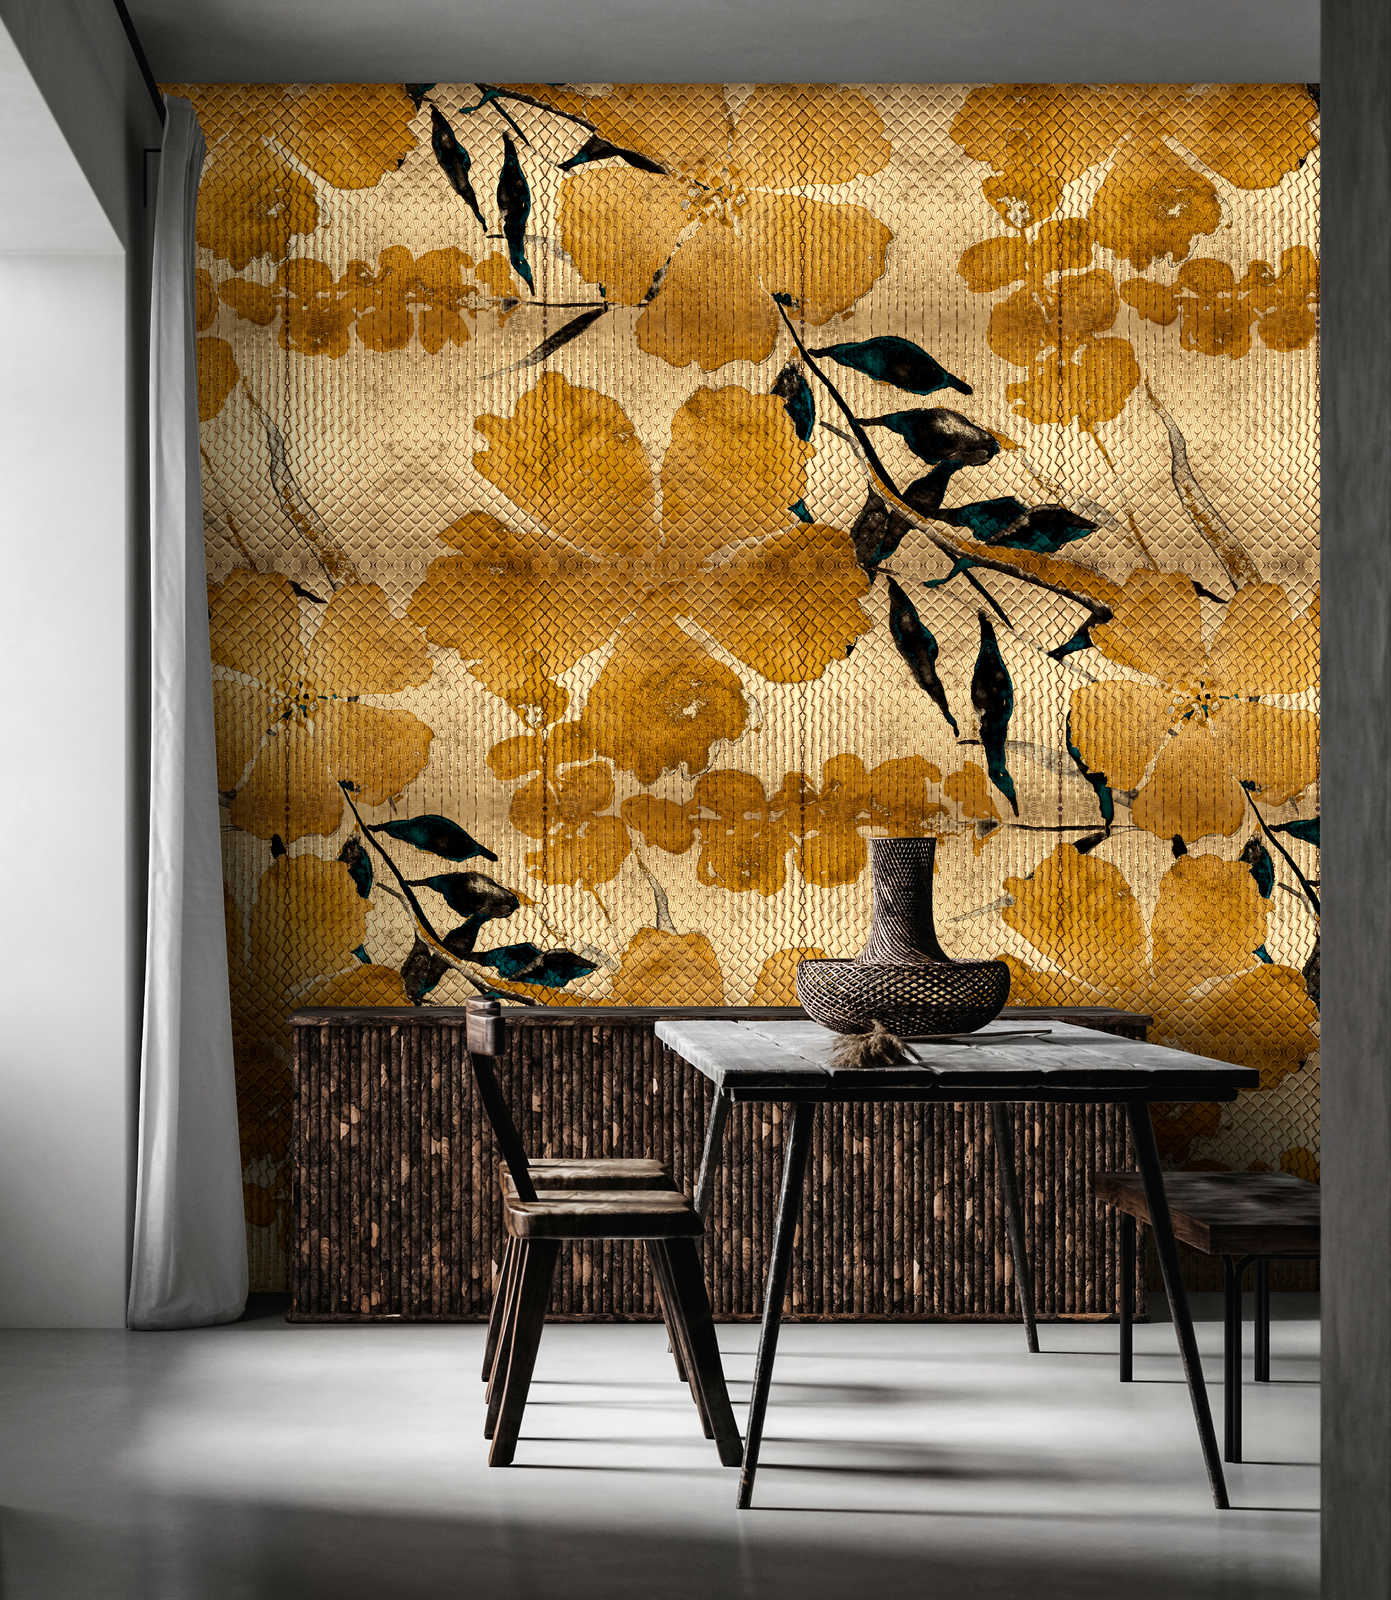             Odessa 1 - Metallic wall mural with cherry blossom pattern in gold
        